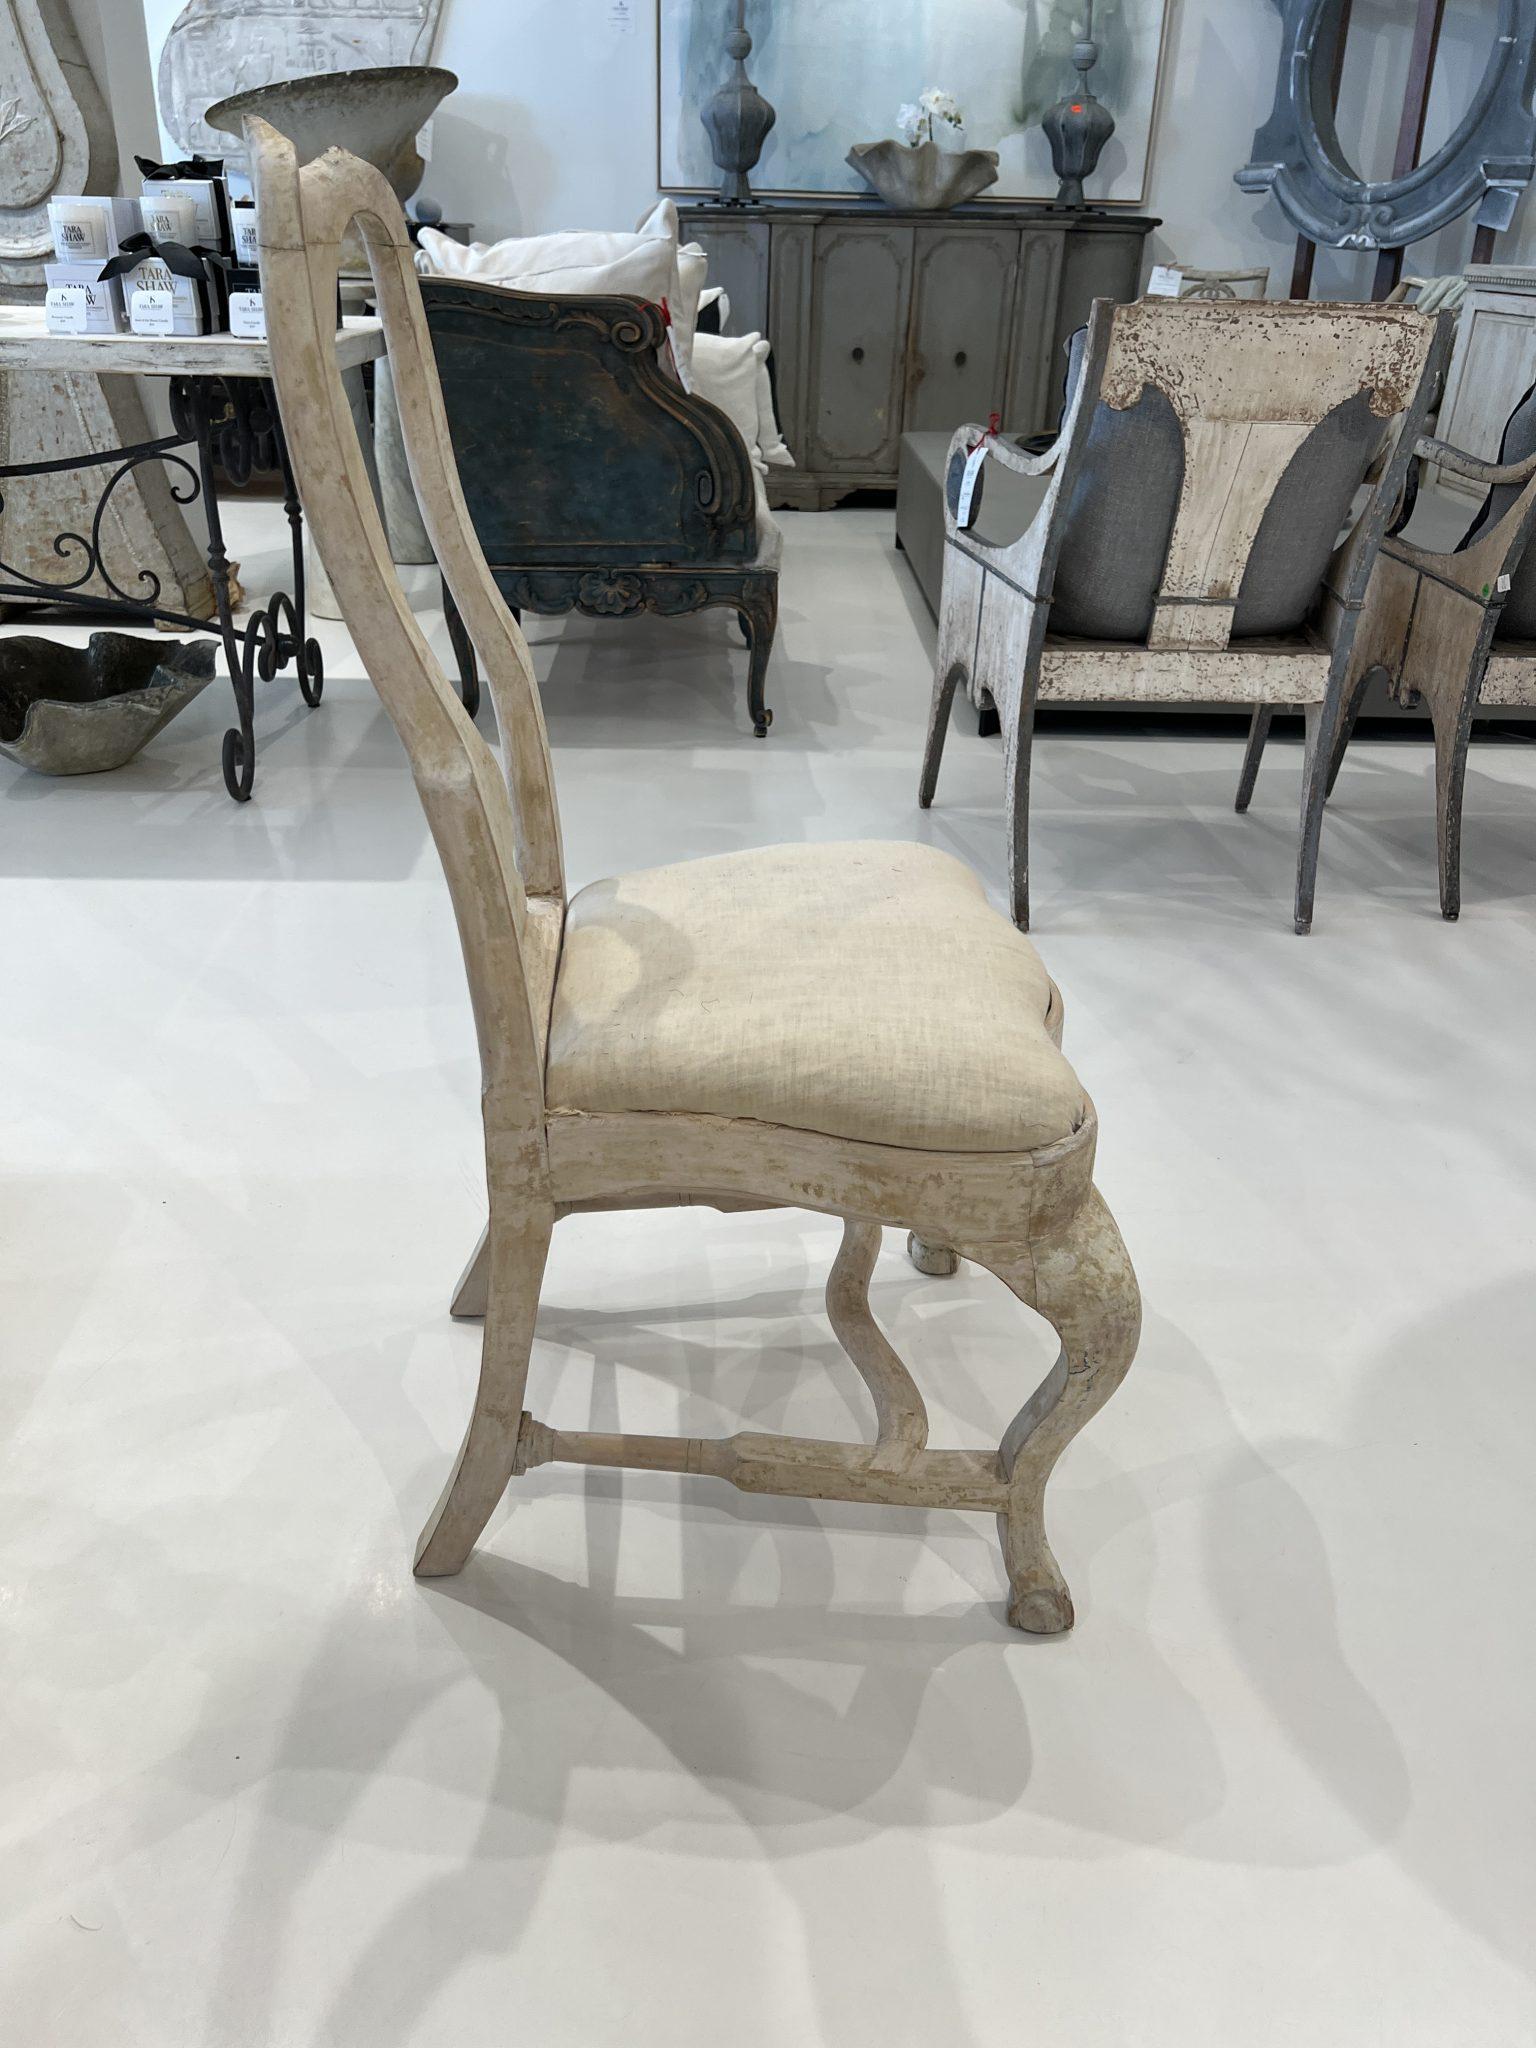 Fine set of 6 Rococo chairs with a white washed finish. Seats are covered in basic fabric that may need to be re-upholstered if desired.